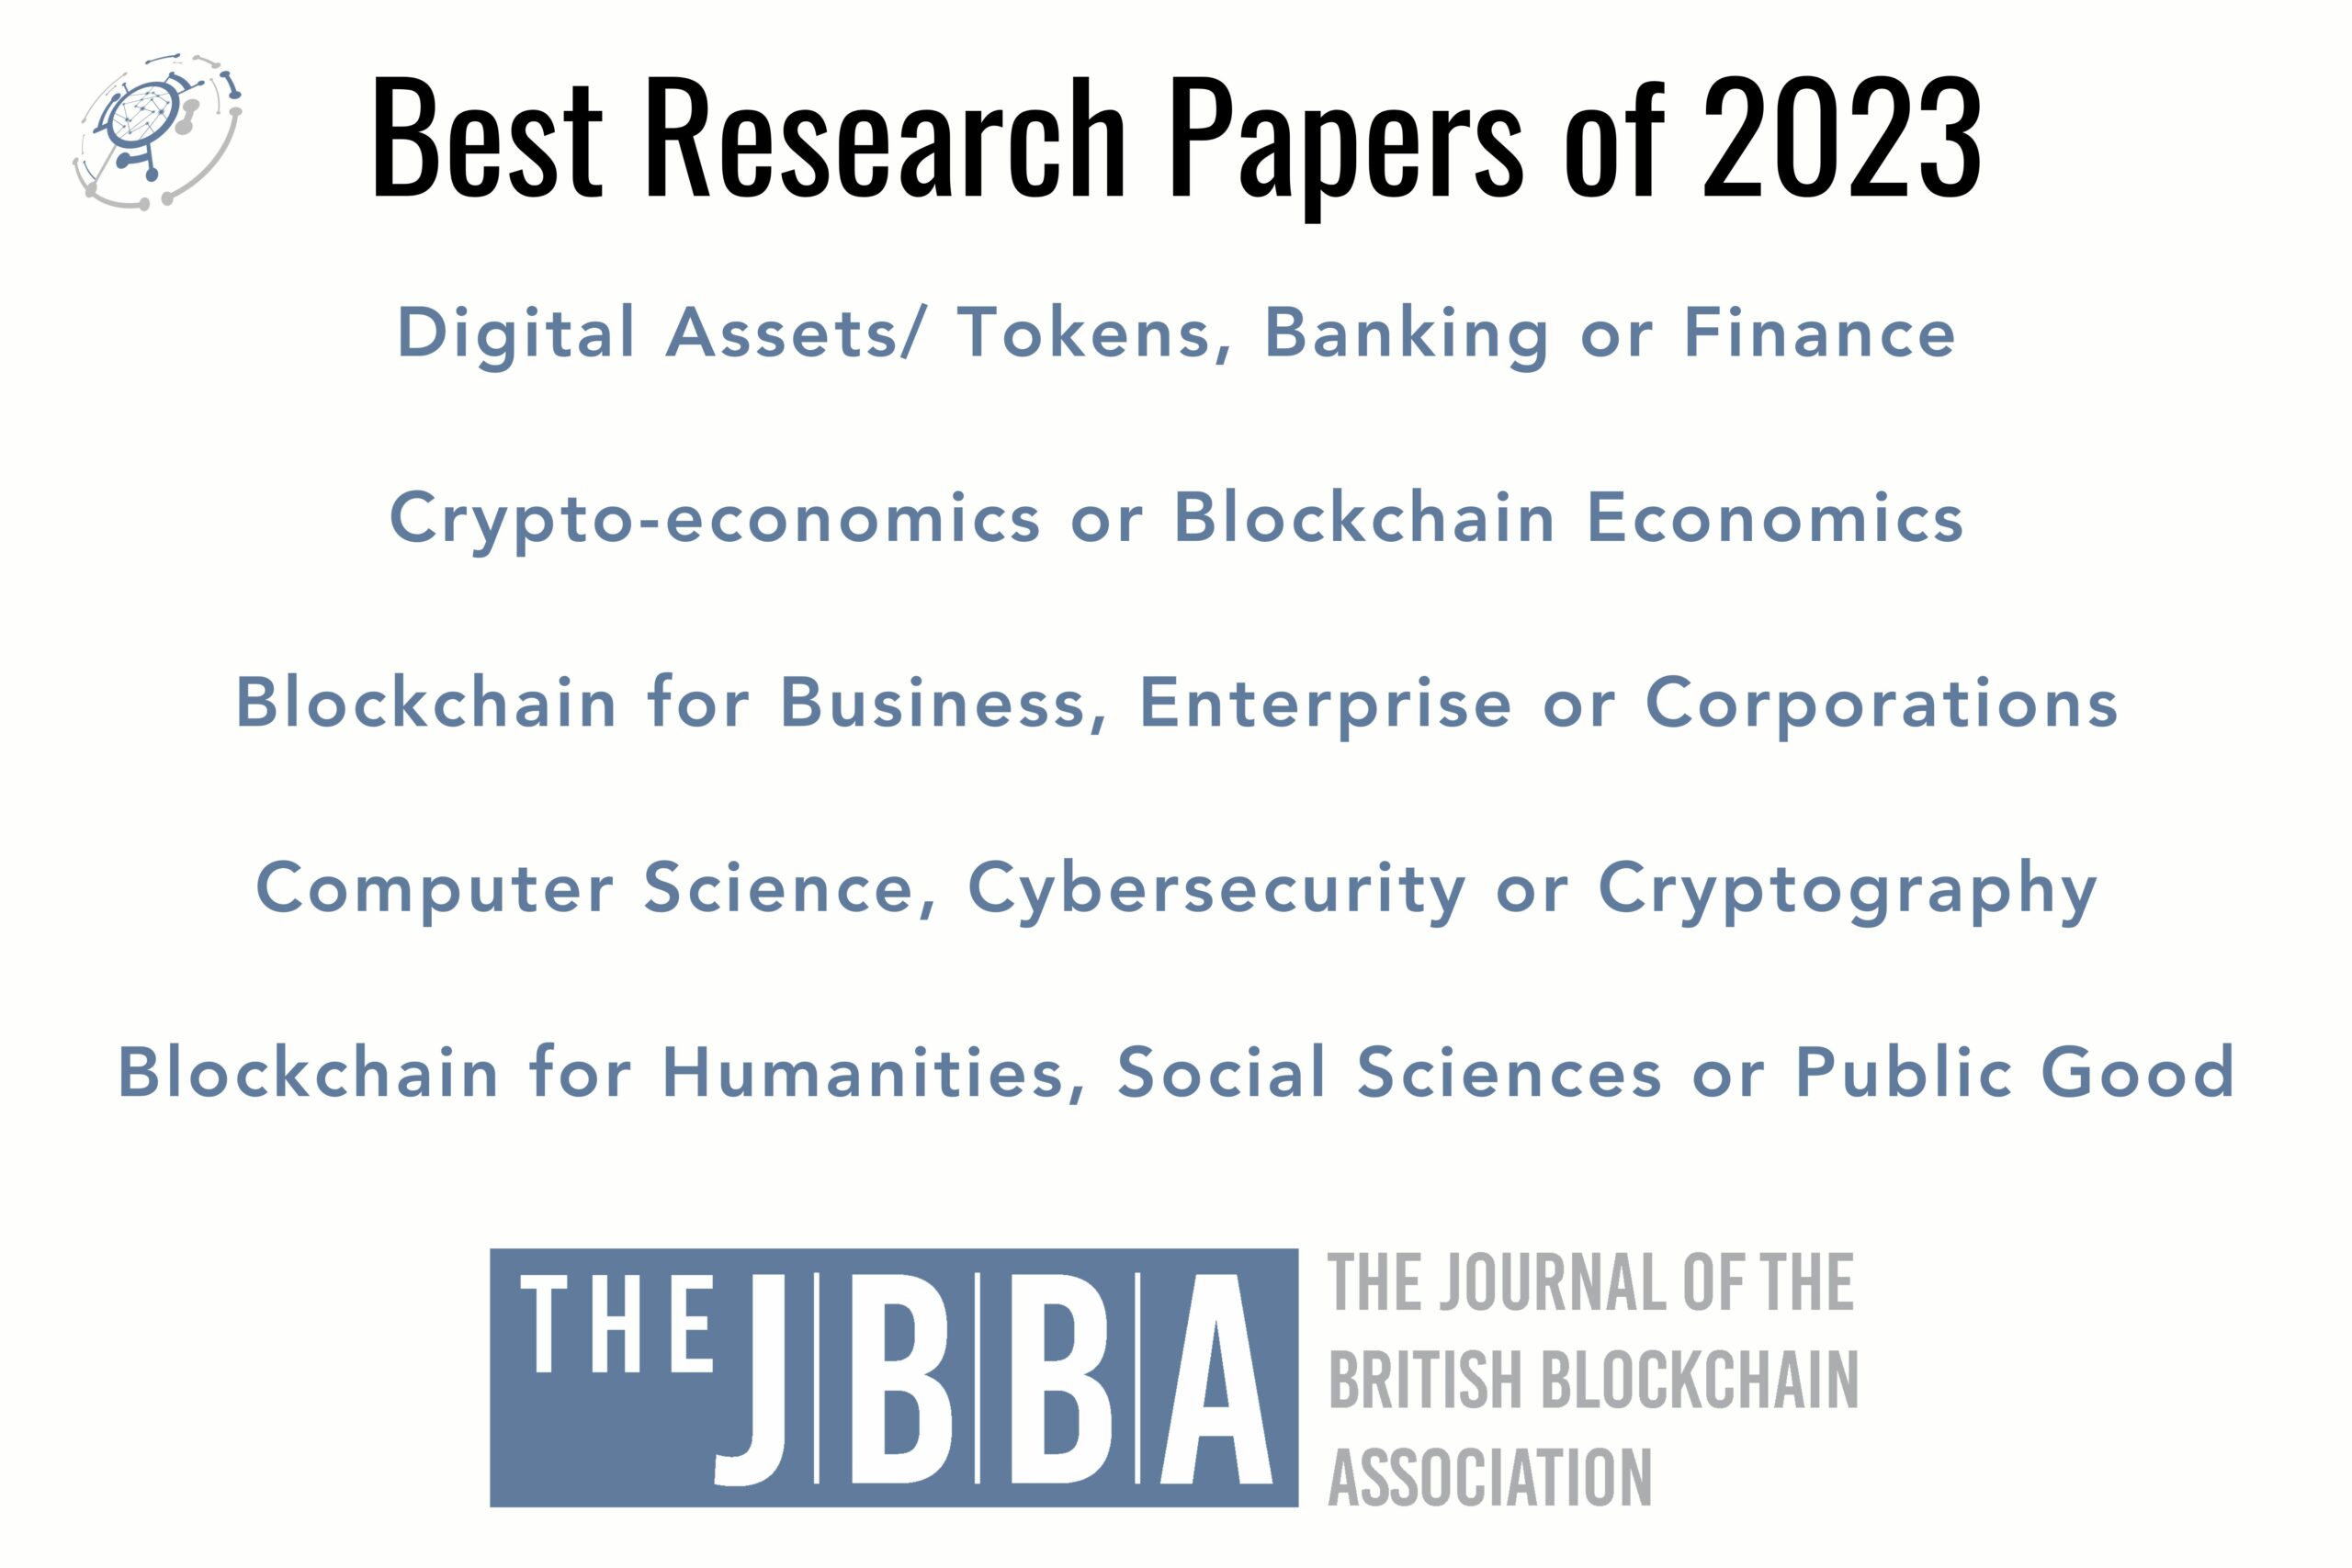 JBBA BEST RESEARCH PAPERS 2023 